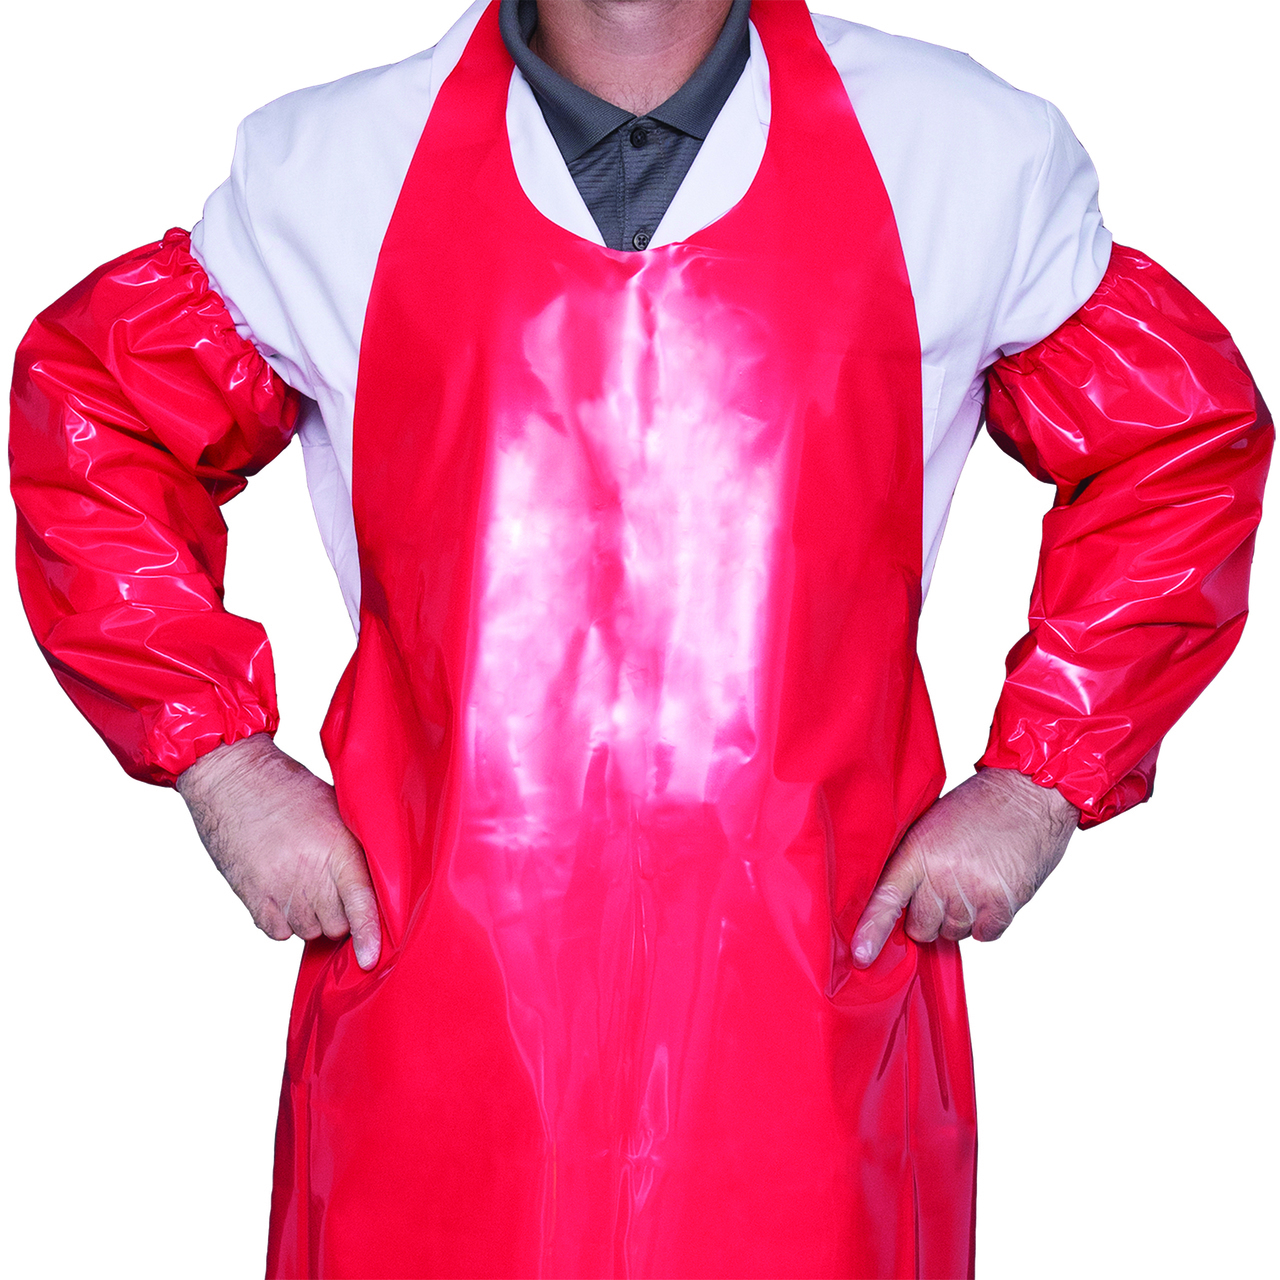 HACCP-approved, Color-Coded Aprons, Gowns and Sleeves